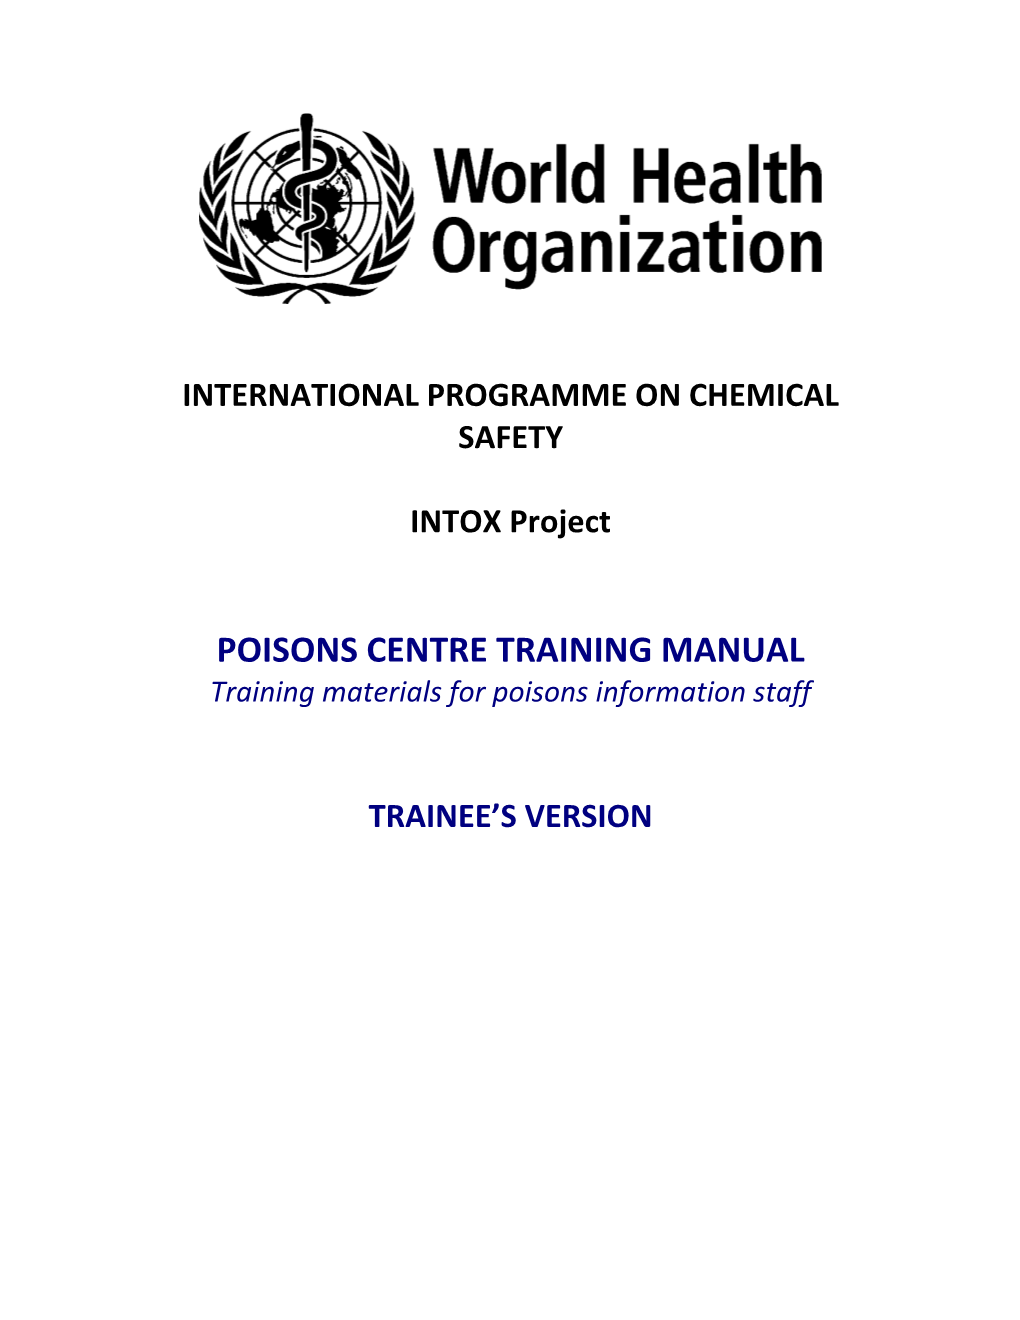 POISONS CENTRE TRAINING MANUAL Training Materials for Poisons Information Staff